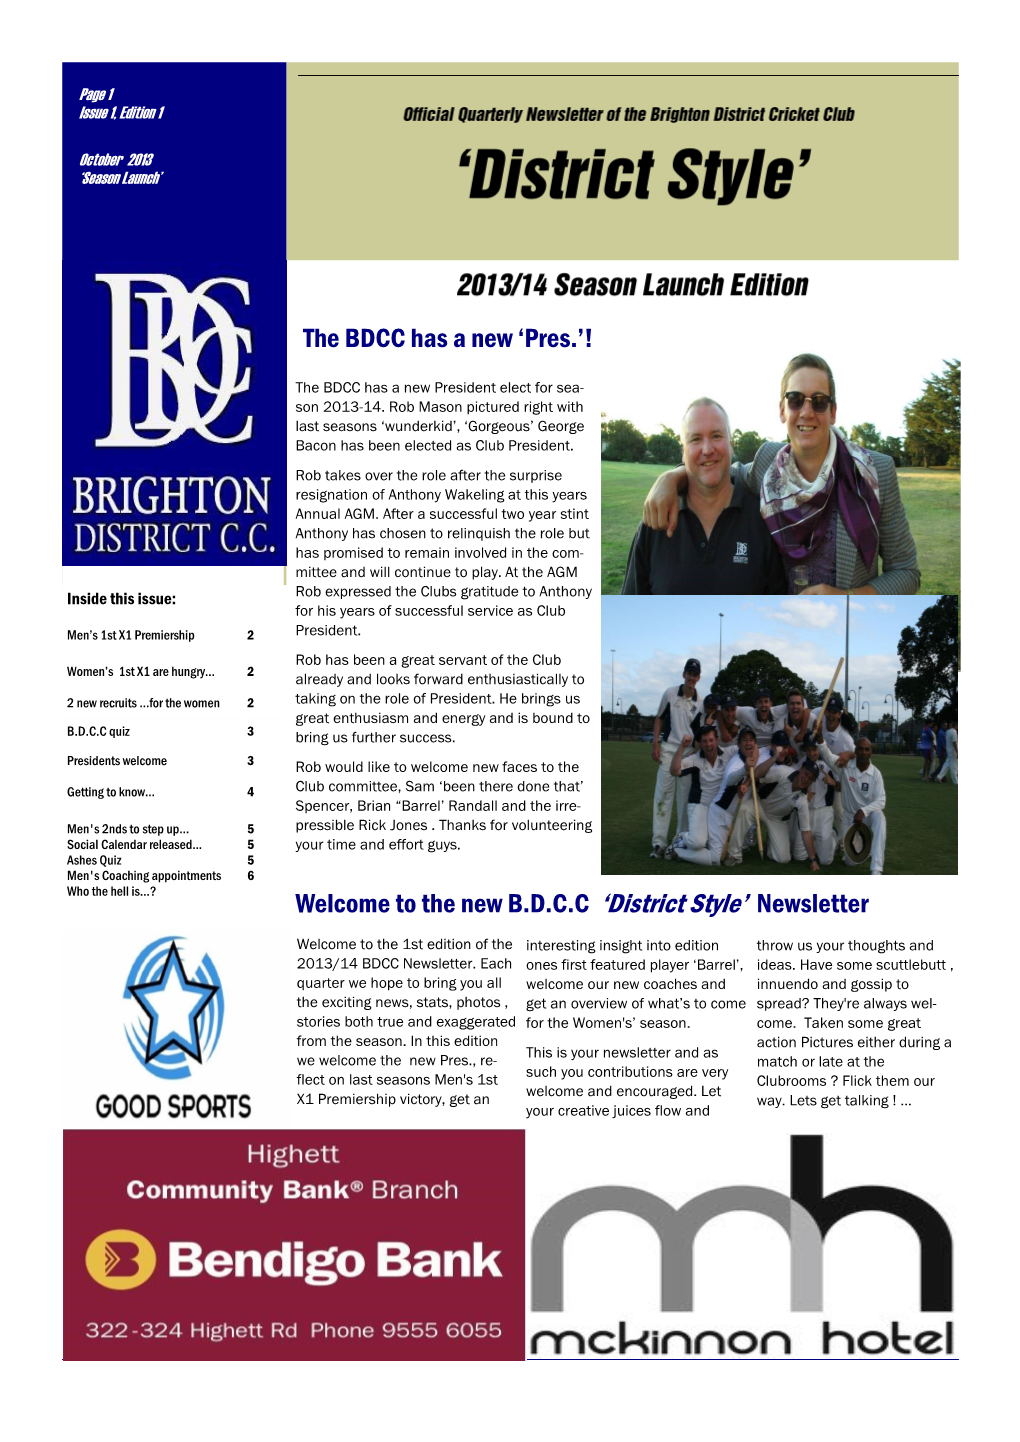 The New BDCC 'District Style' Newsletter